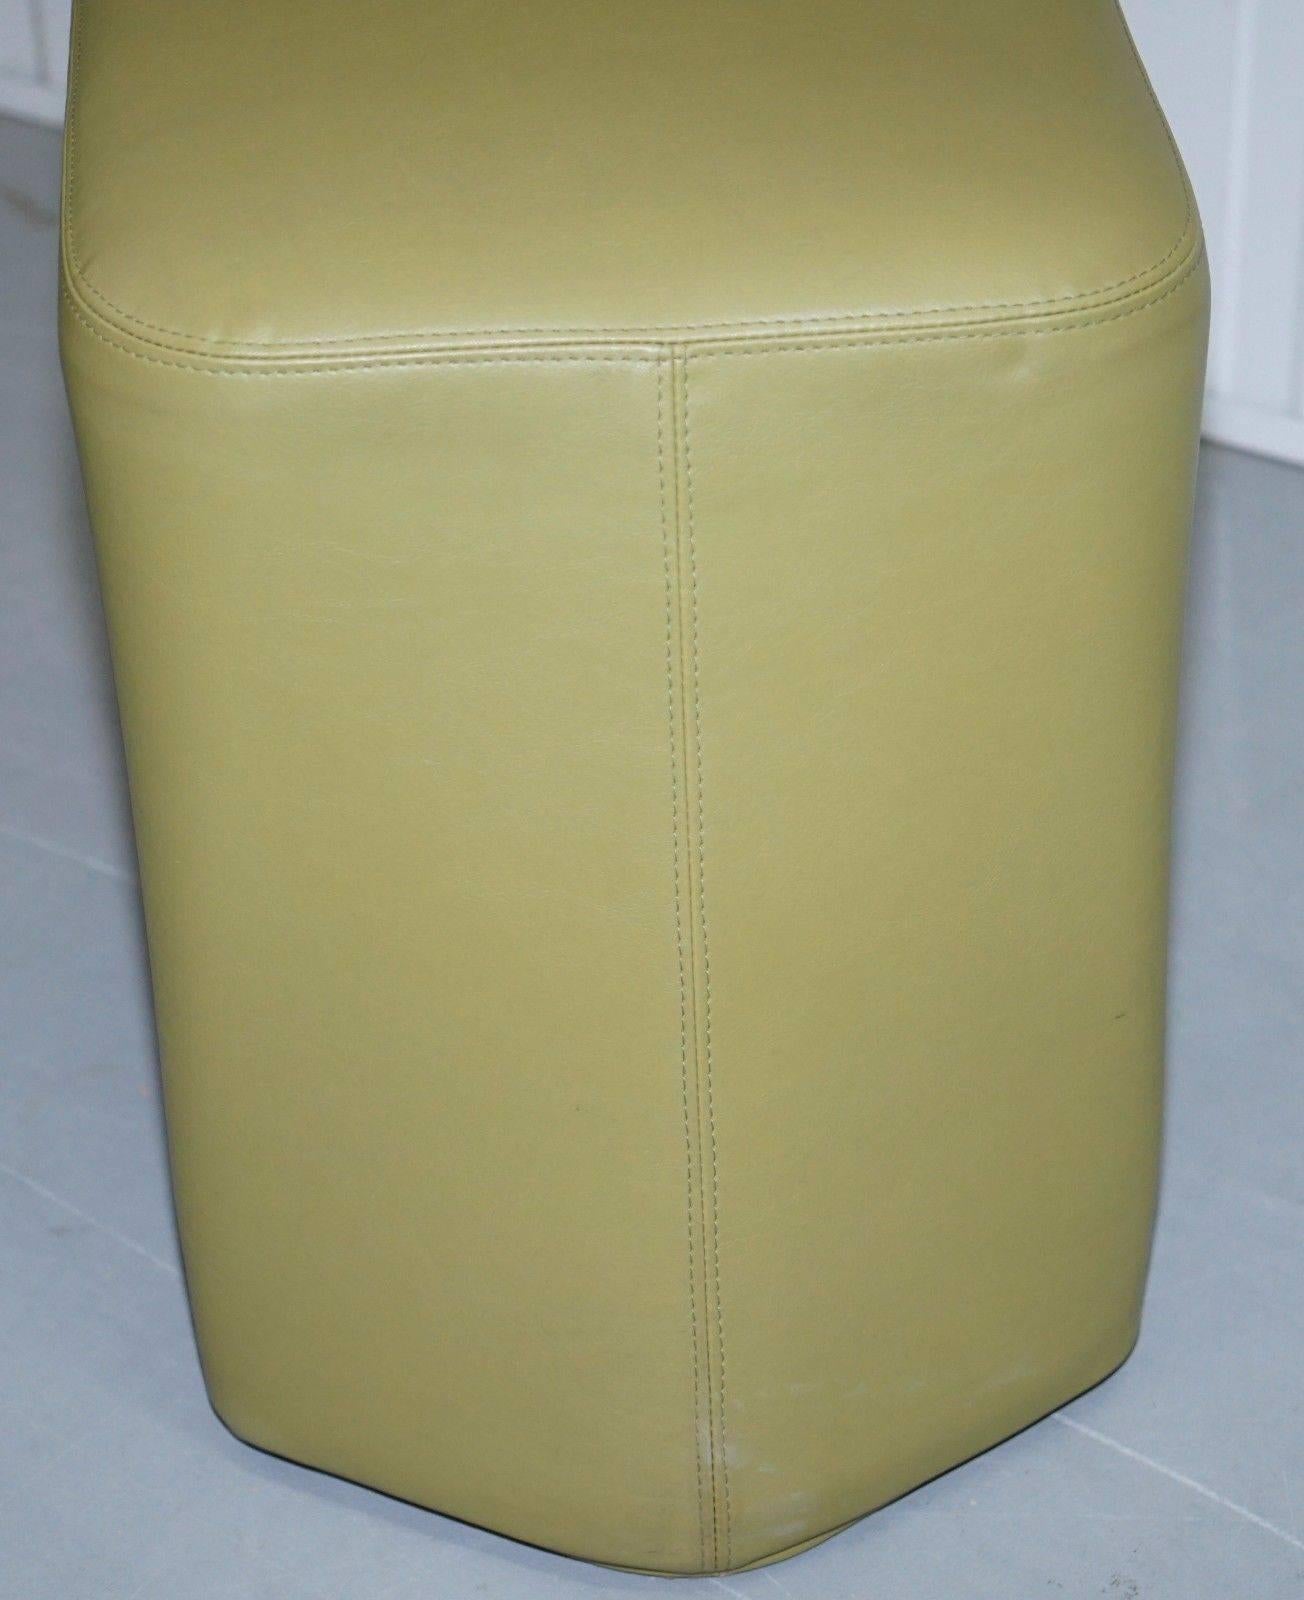 1 of 6 Each Boss Design Hoot Leather Stools Modular Contemporary Design For Sale 2